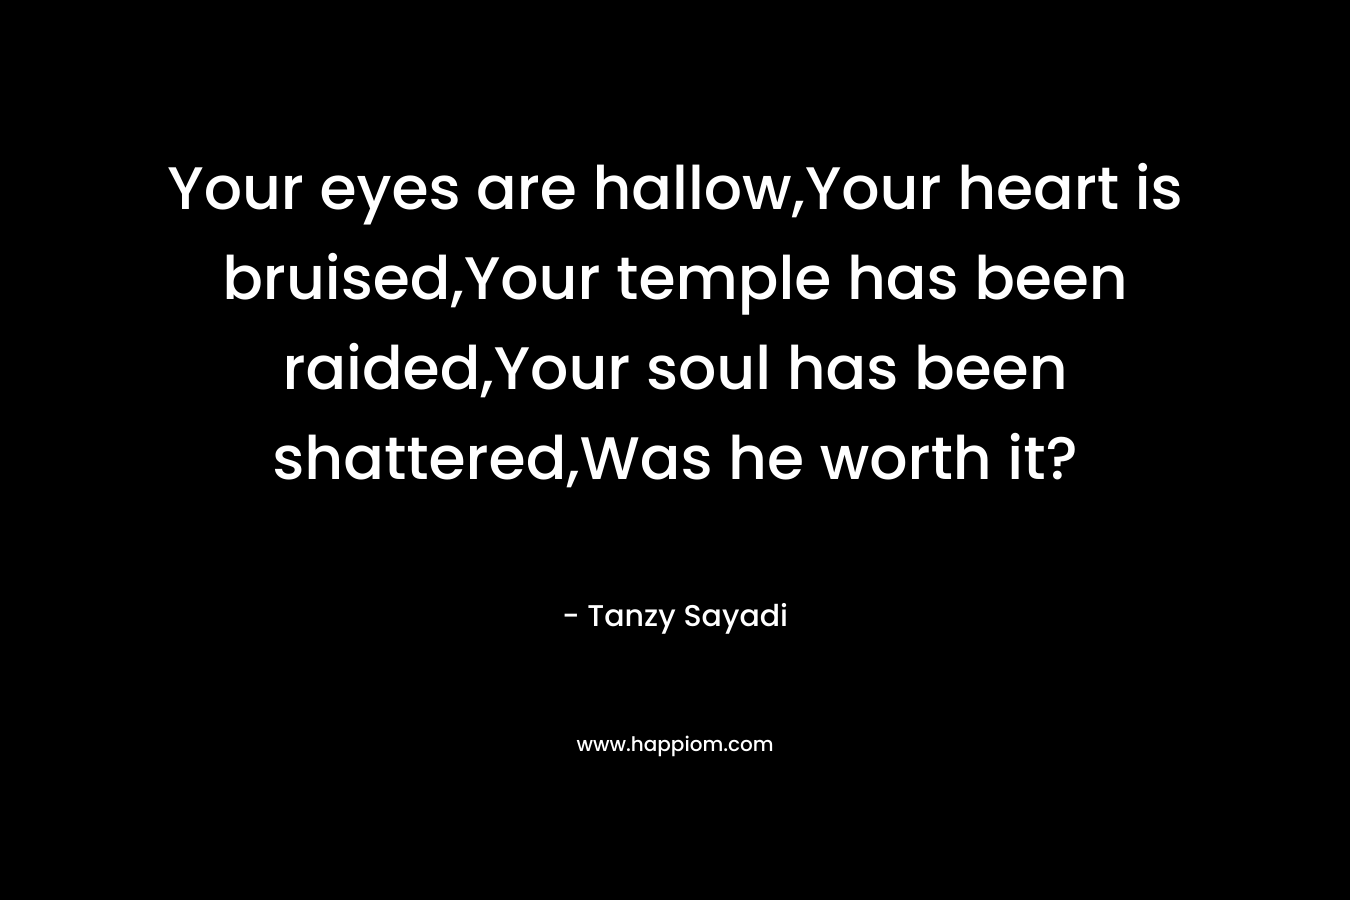 Your eyes are hallow,Your heart is bruised,Your temple has been raided,Your soul has been shattered,Was he worth it?